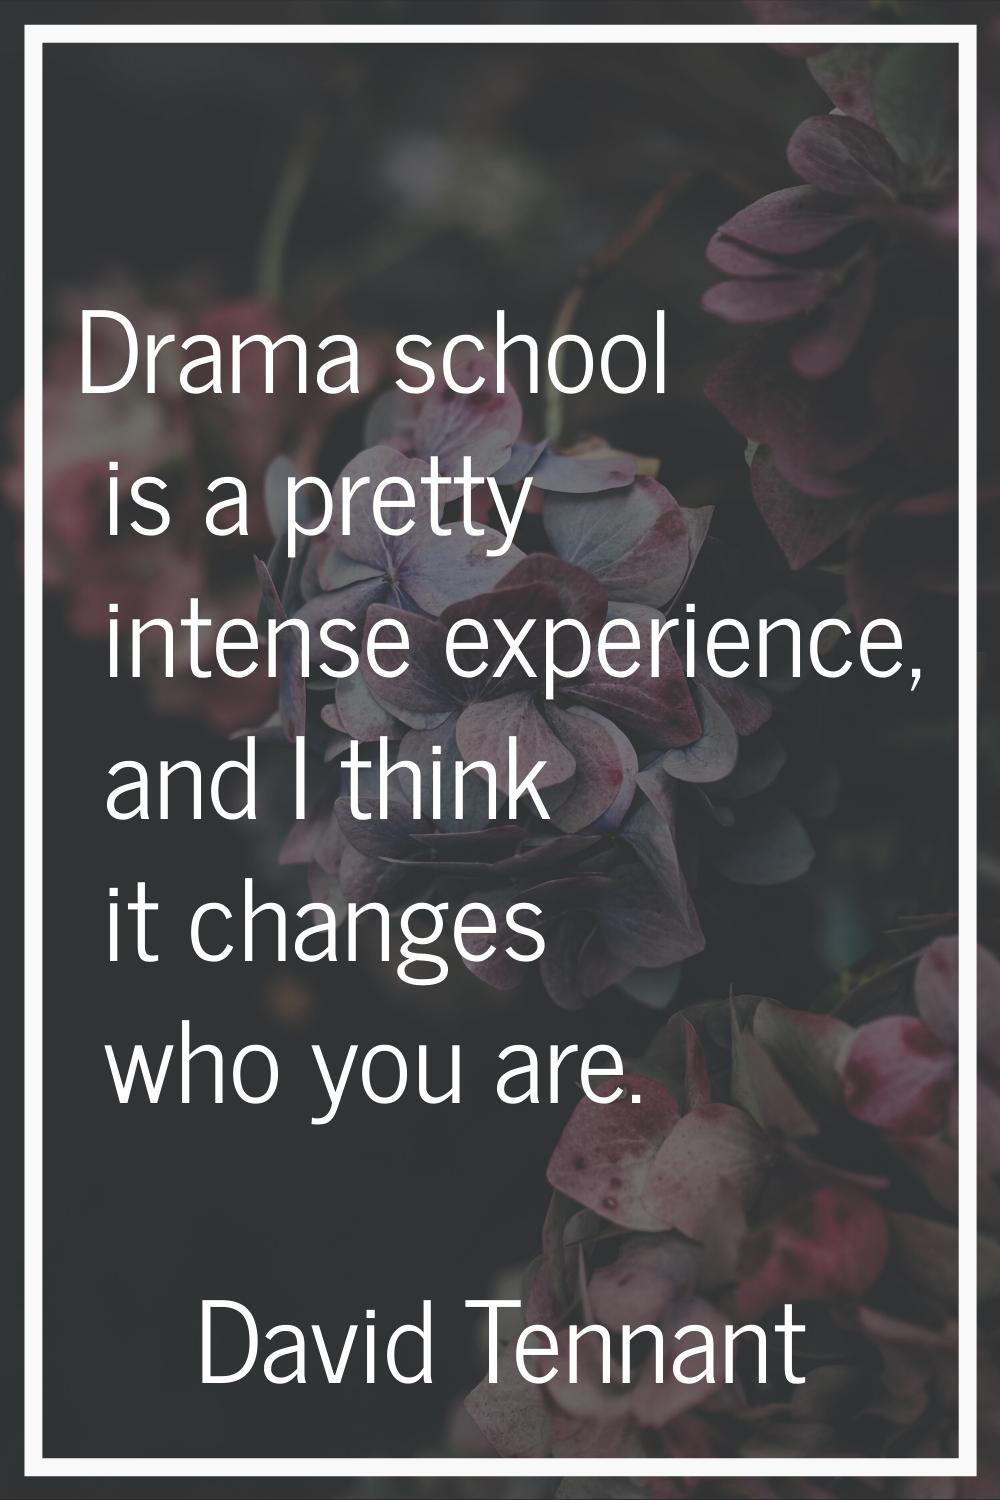 Drama school is a pretty intense experience, and I think it changes who you are.